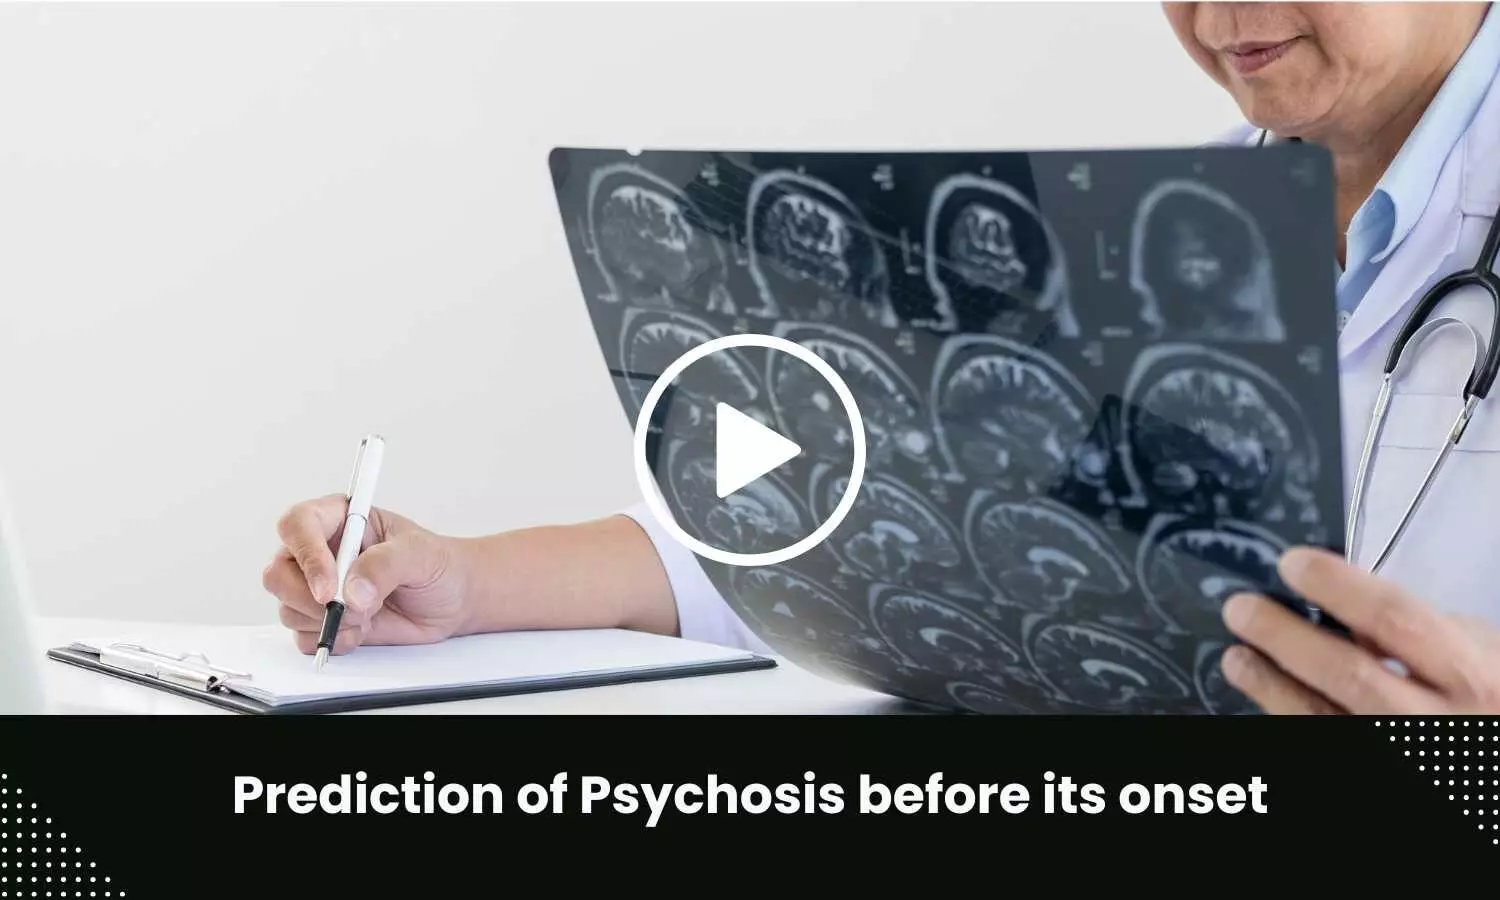 Prediction of Psychosis before its onset